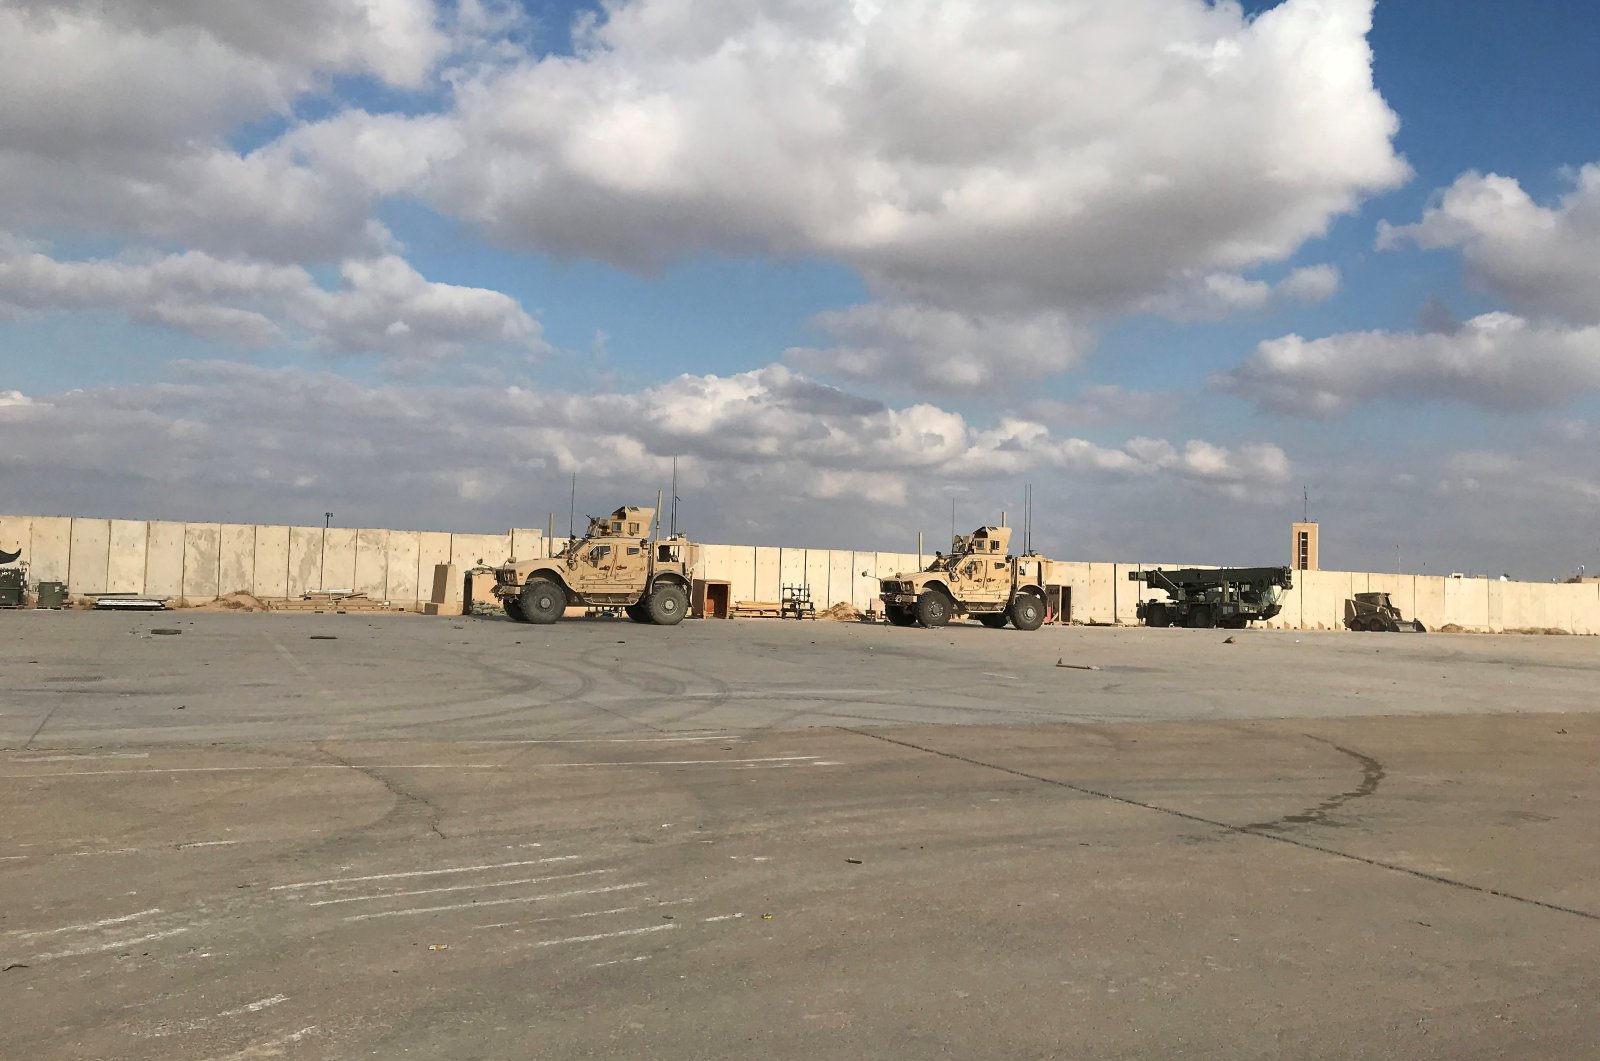 Military vehicles of U.S. soldiers are seen at the Ain al-Asad air base in Anbar province, Iraq, Jan. 13, 2020. (Reuters File Photo)